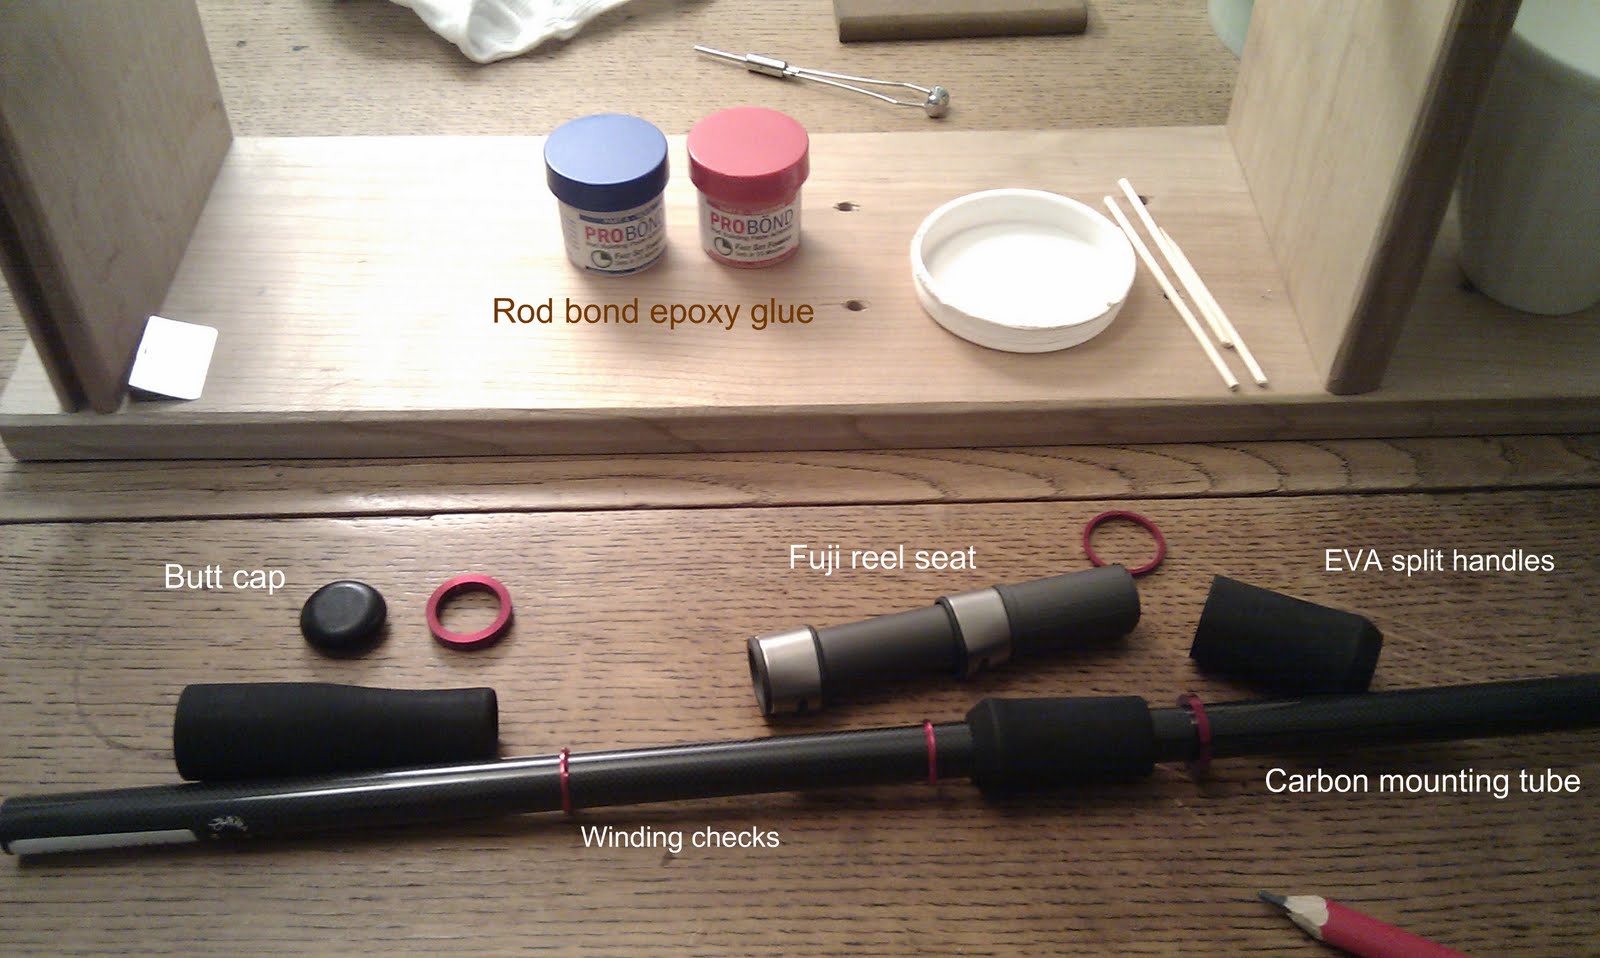 Sea kayak fishing: 2. Rod Building - Glueing the handle together